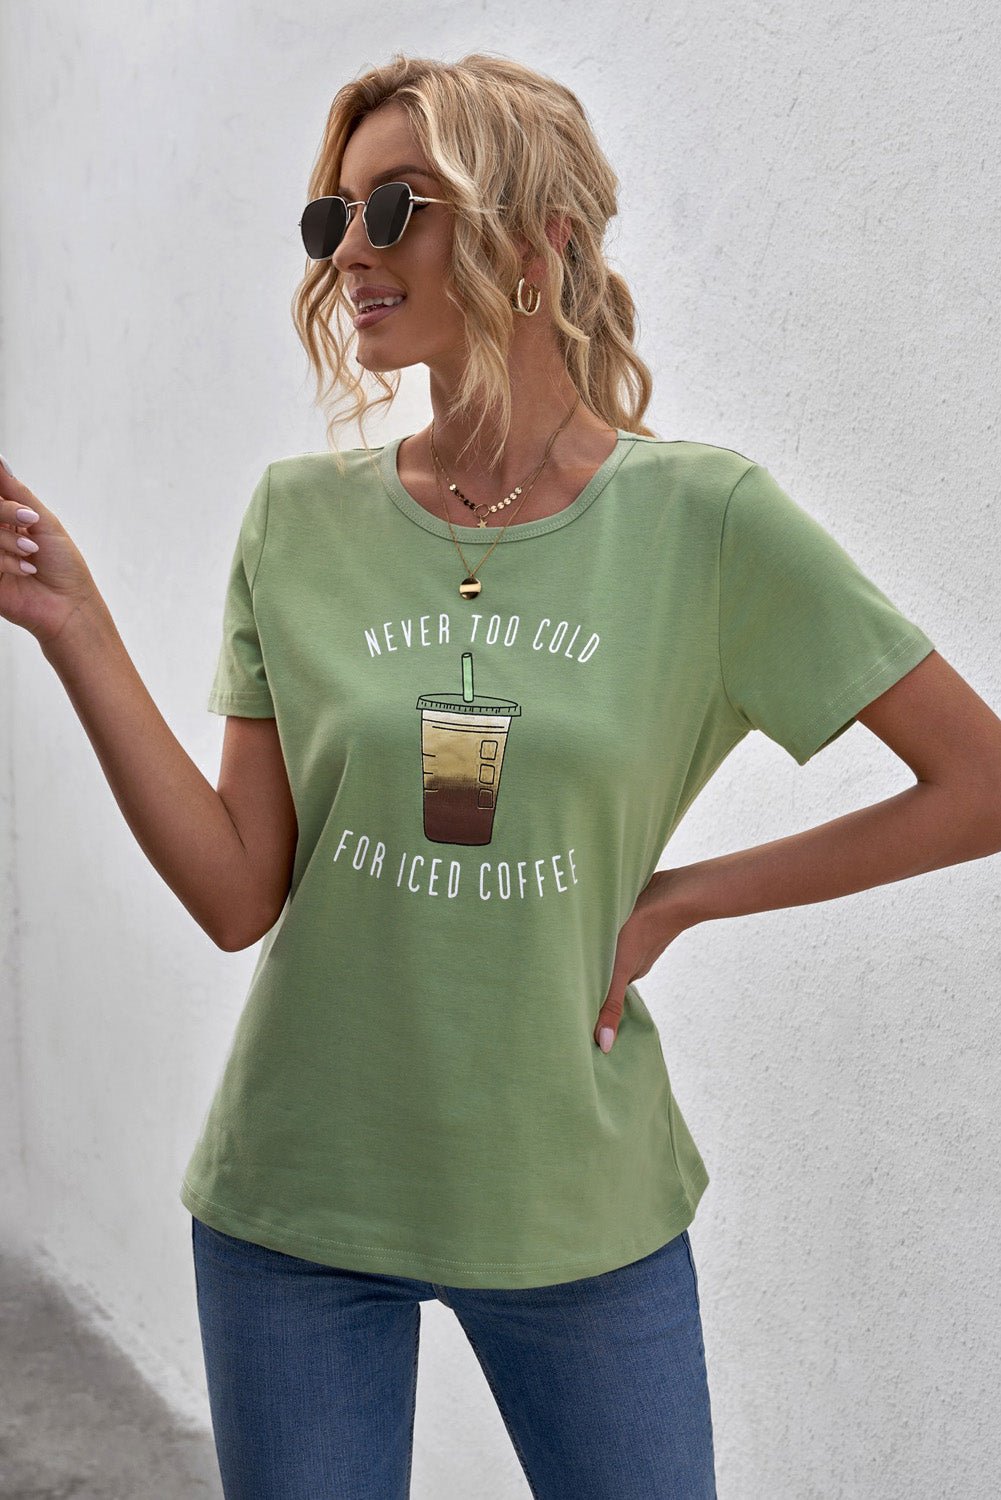 Indulge in Love and Comfort with Never Too Cold for Iced Coffee Tee - Celebrating Life's Simple Pleasures with Timeless Romance. - Guy Christopher